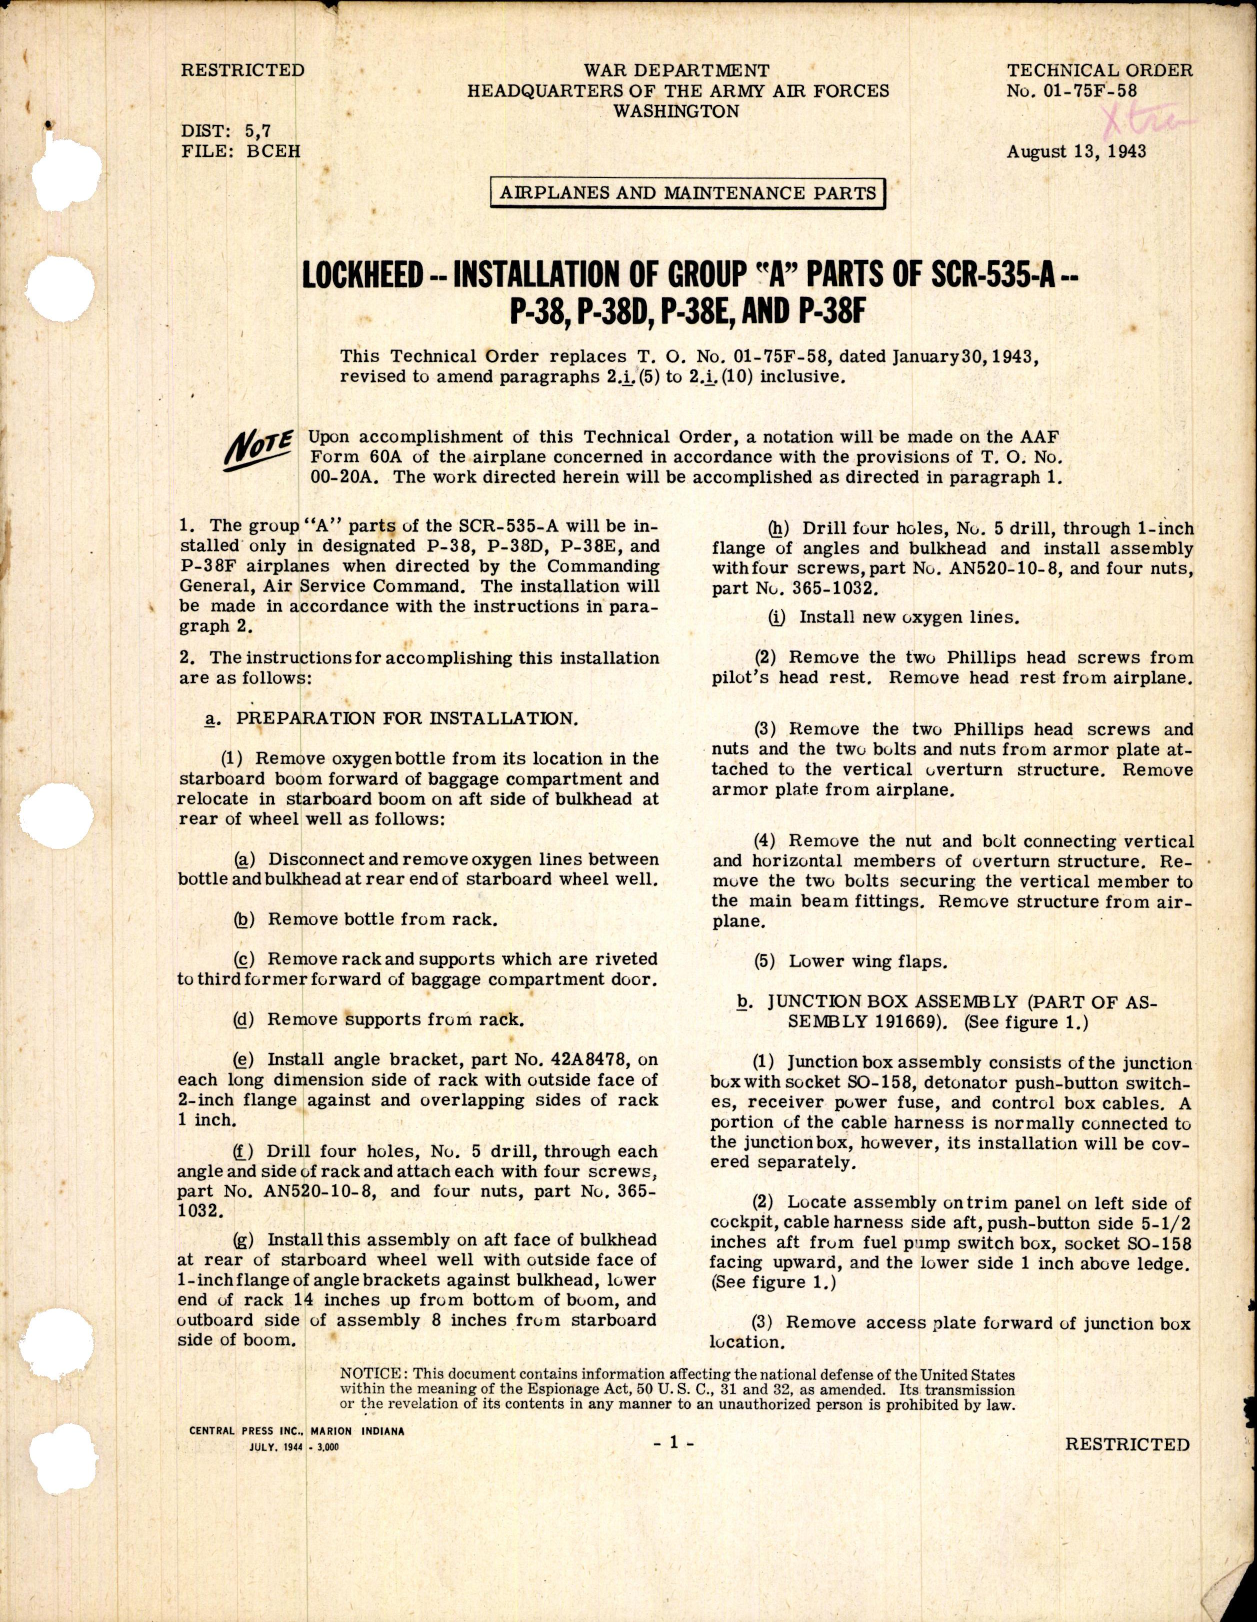 Sample page 1 from AirCorps Library document: Installation of Group A Parts of SCR-535-A for P-38D, E, and F